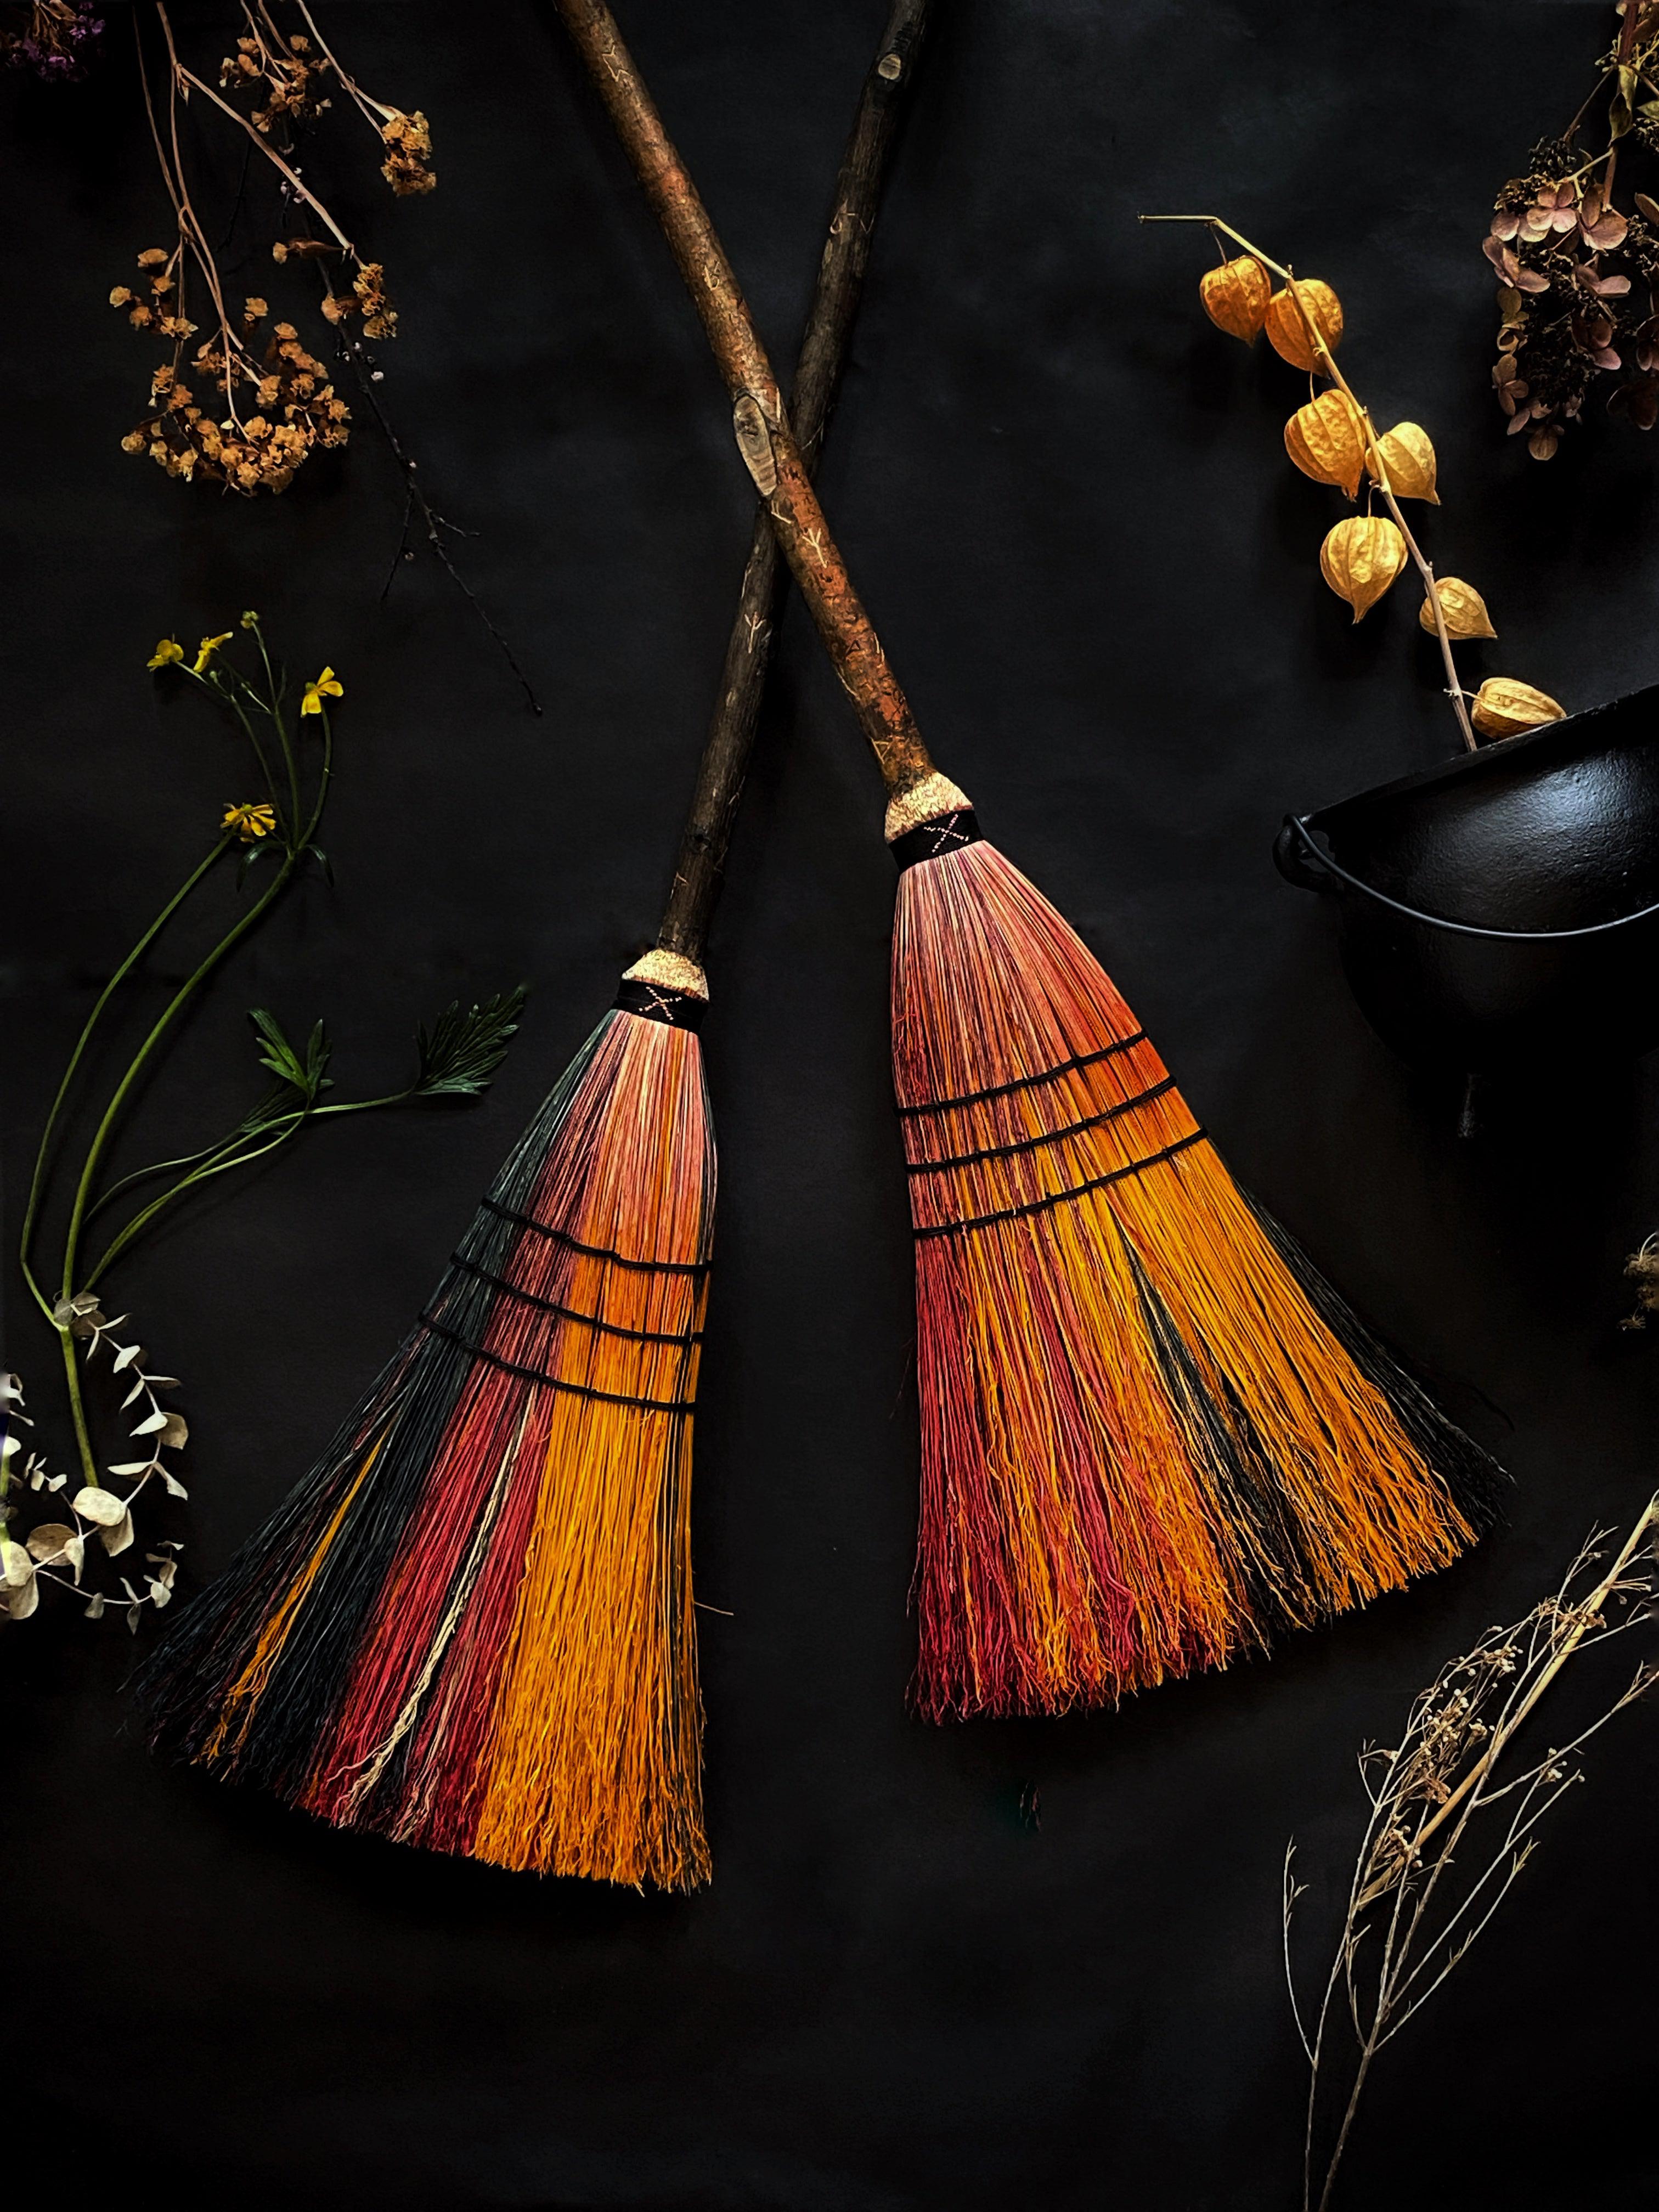 "Big Boss Witch" Sweeper Brooms - Kitchen Broom